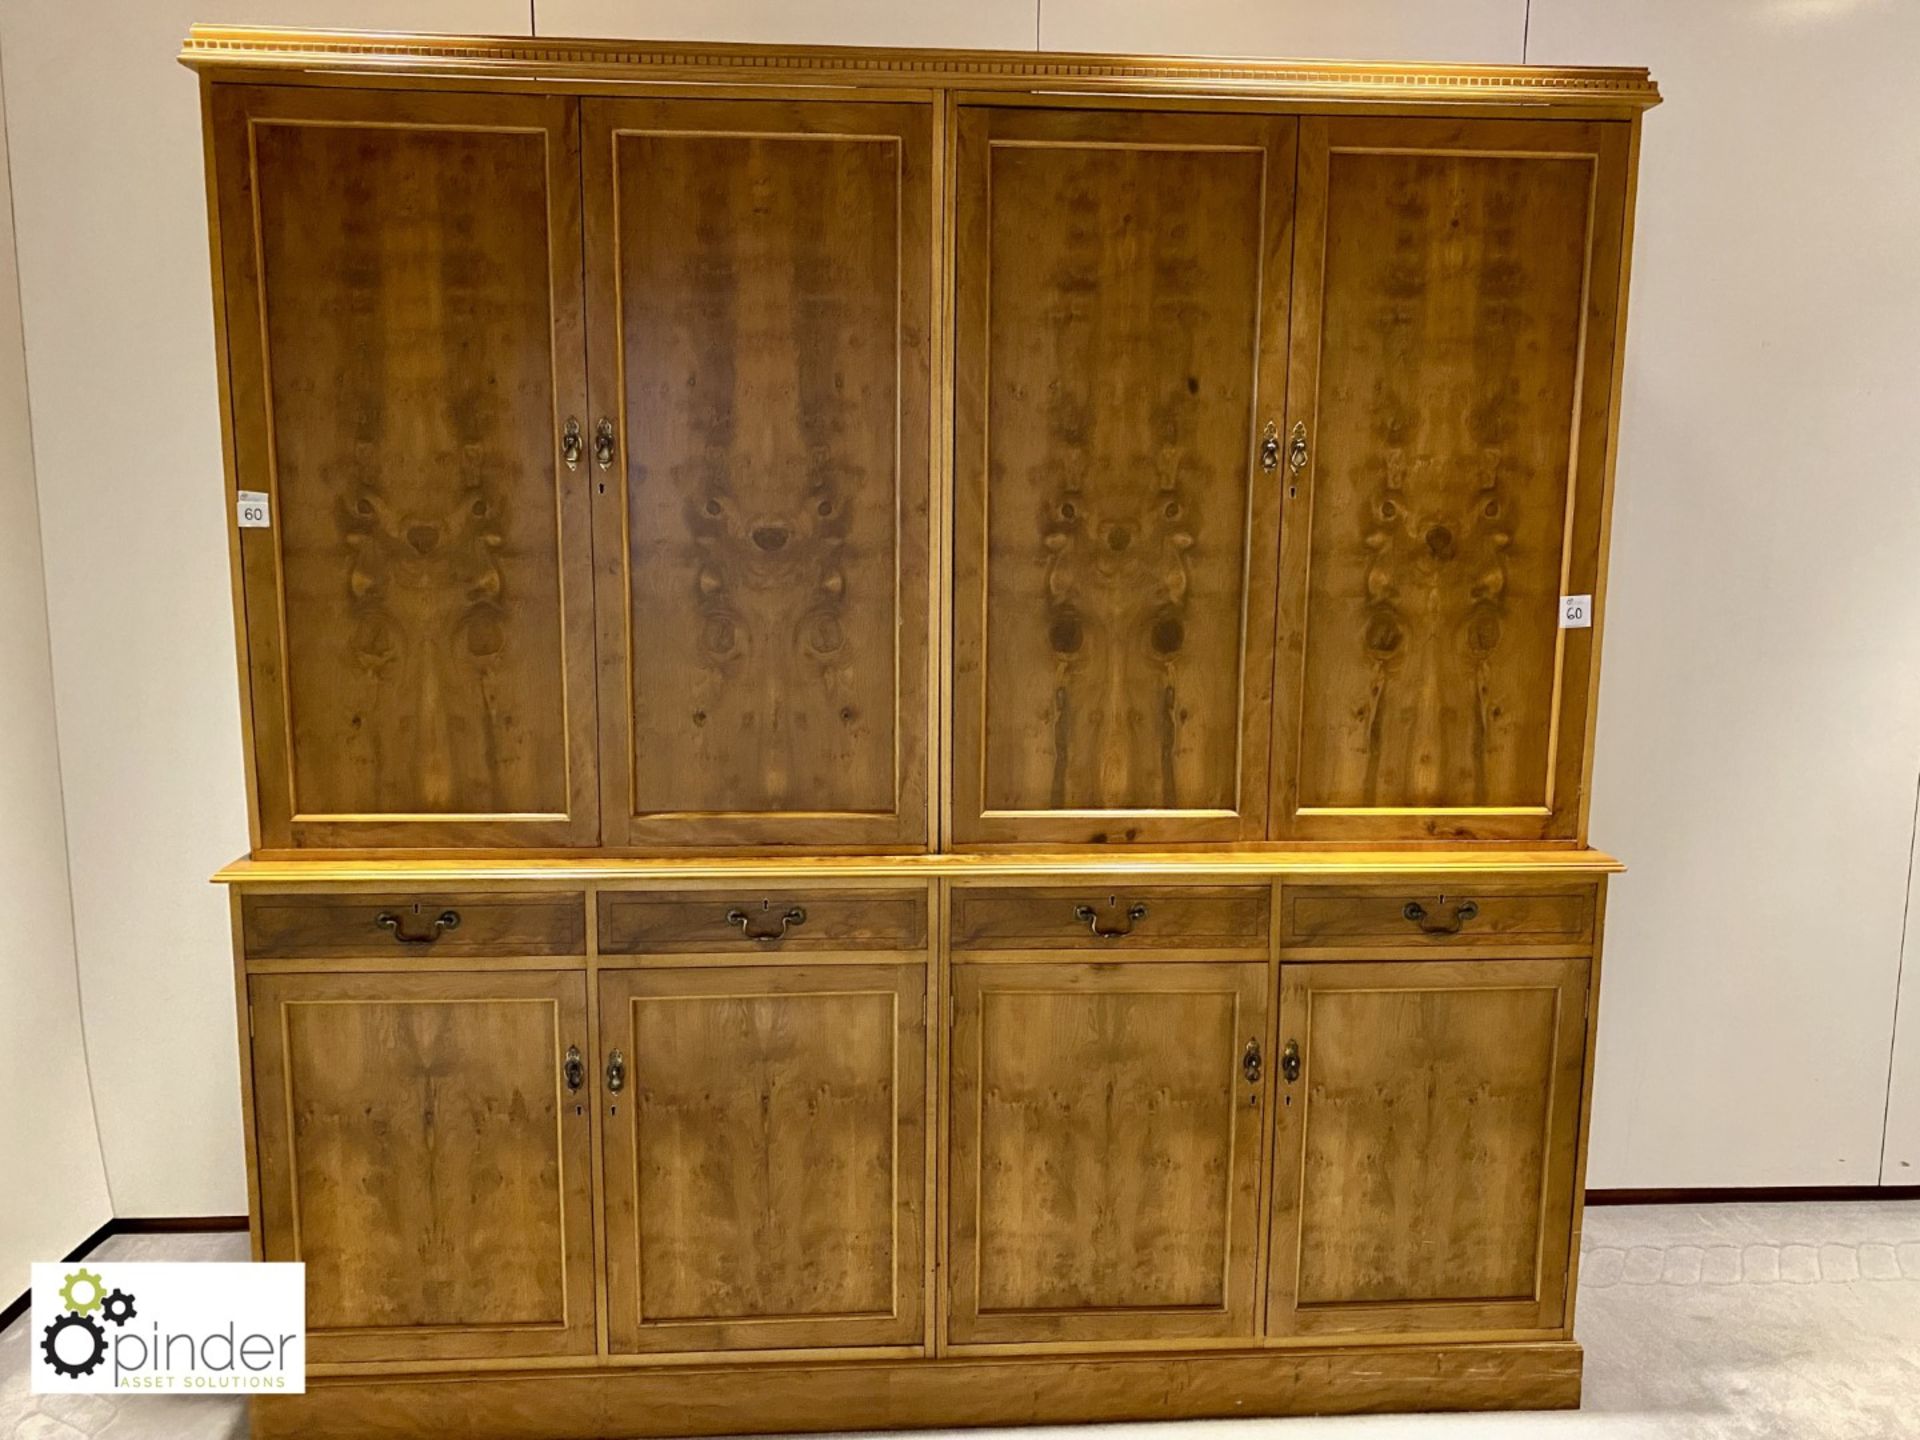 Walnut effect double door Cabinet, with base unit, 2210mm x 680mm x 2200mm high (located in